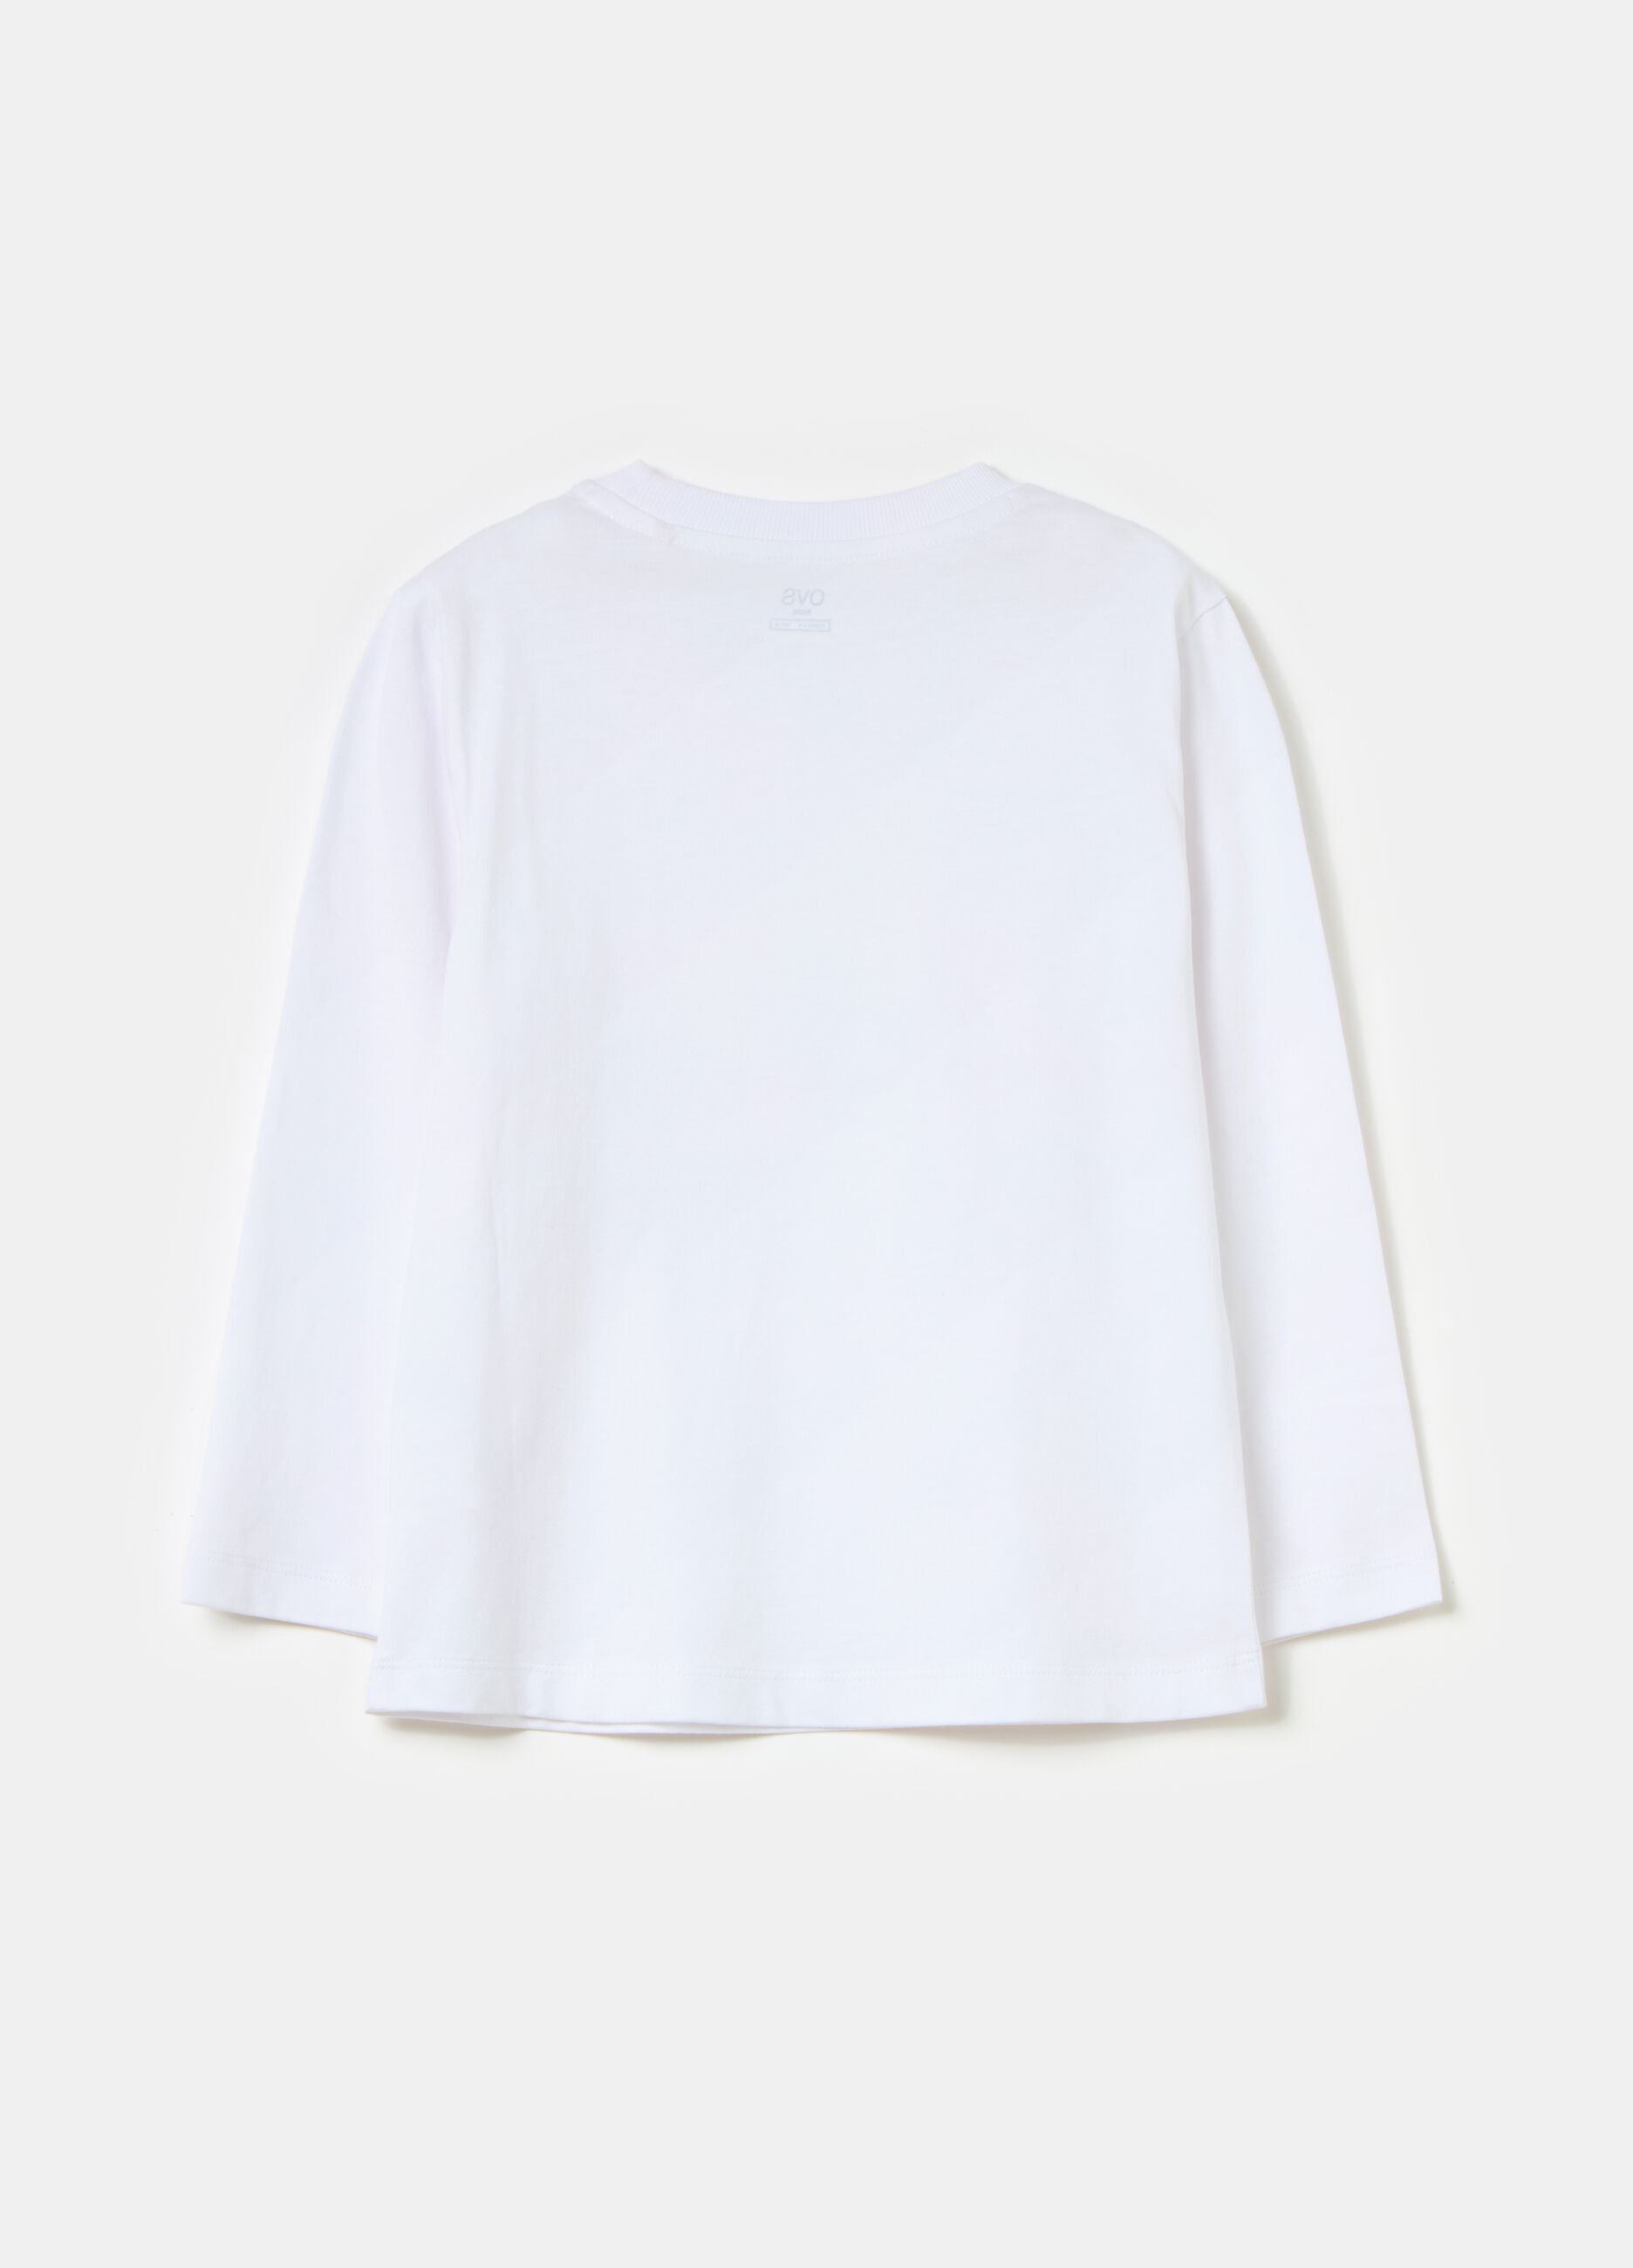 Long-sleeved solid colour T-shirt